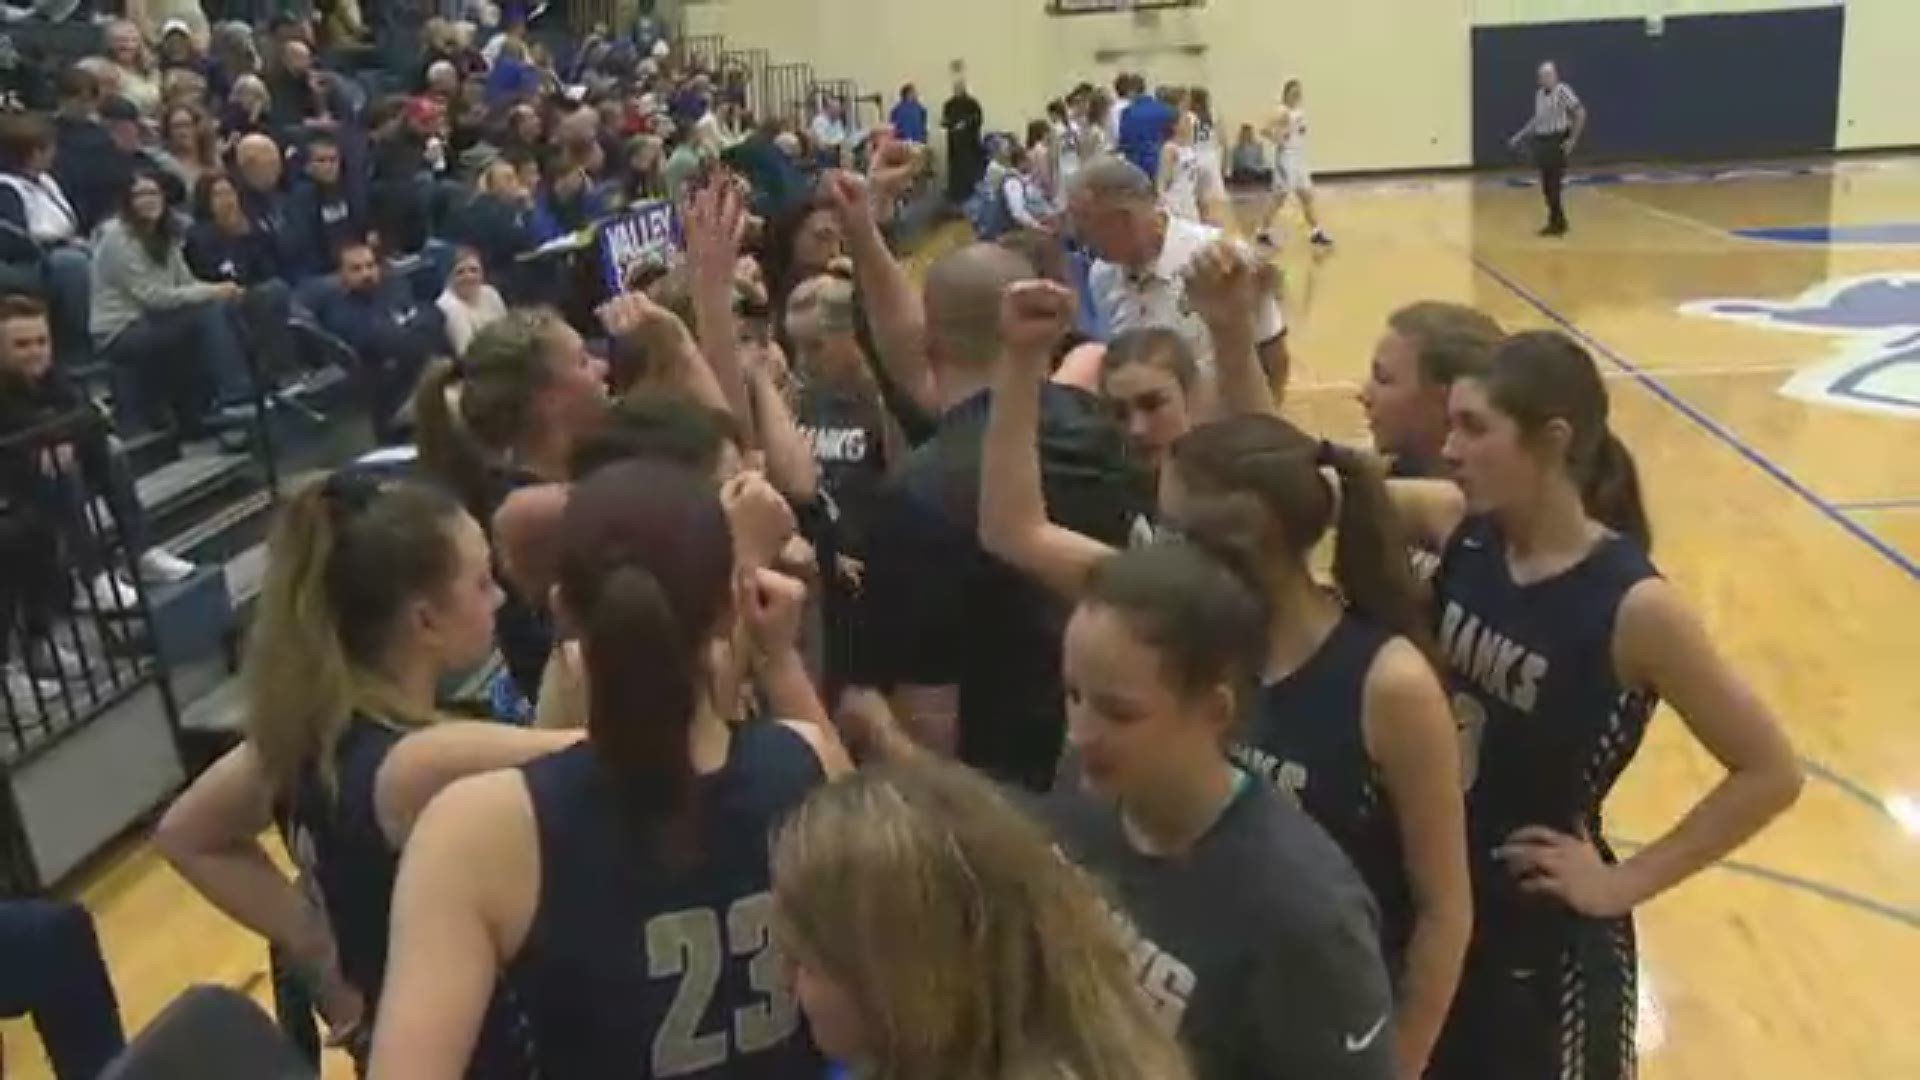 Highlights of the Banks Braves 2019 girls basketball team. Highlights were part of KGW’s Friday Night Hoops coverage. #KGWPreps